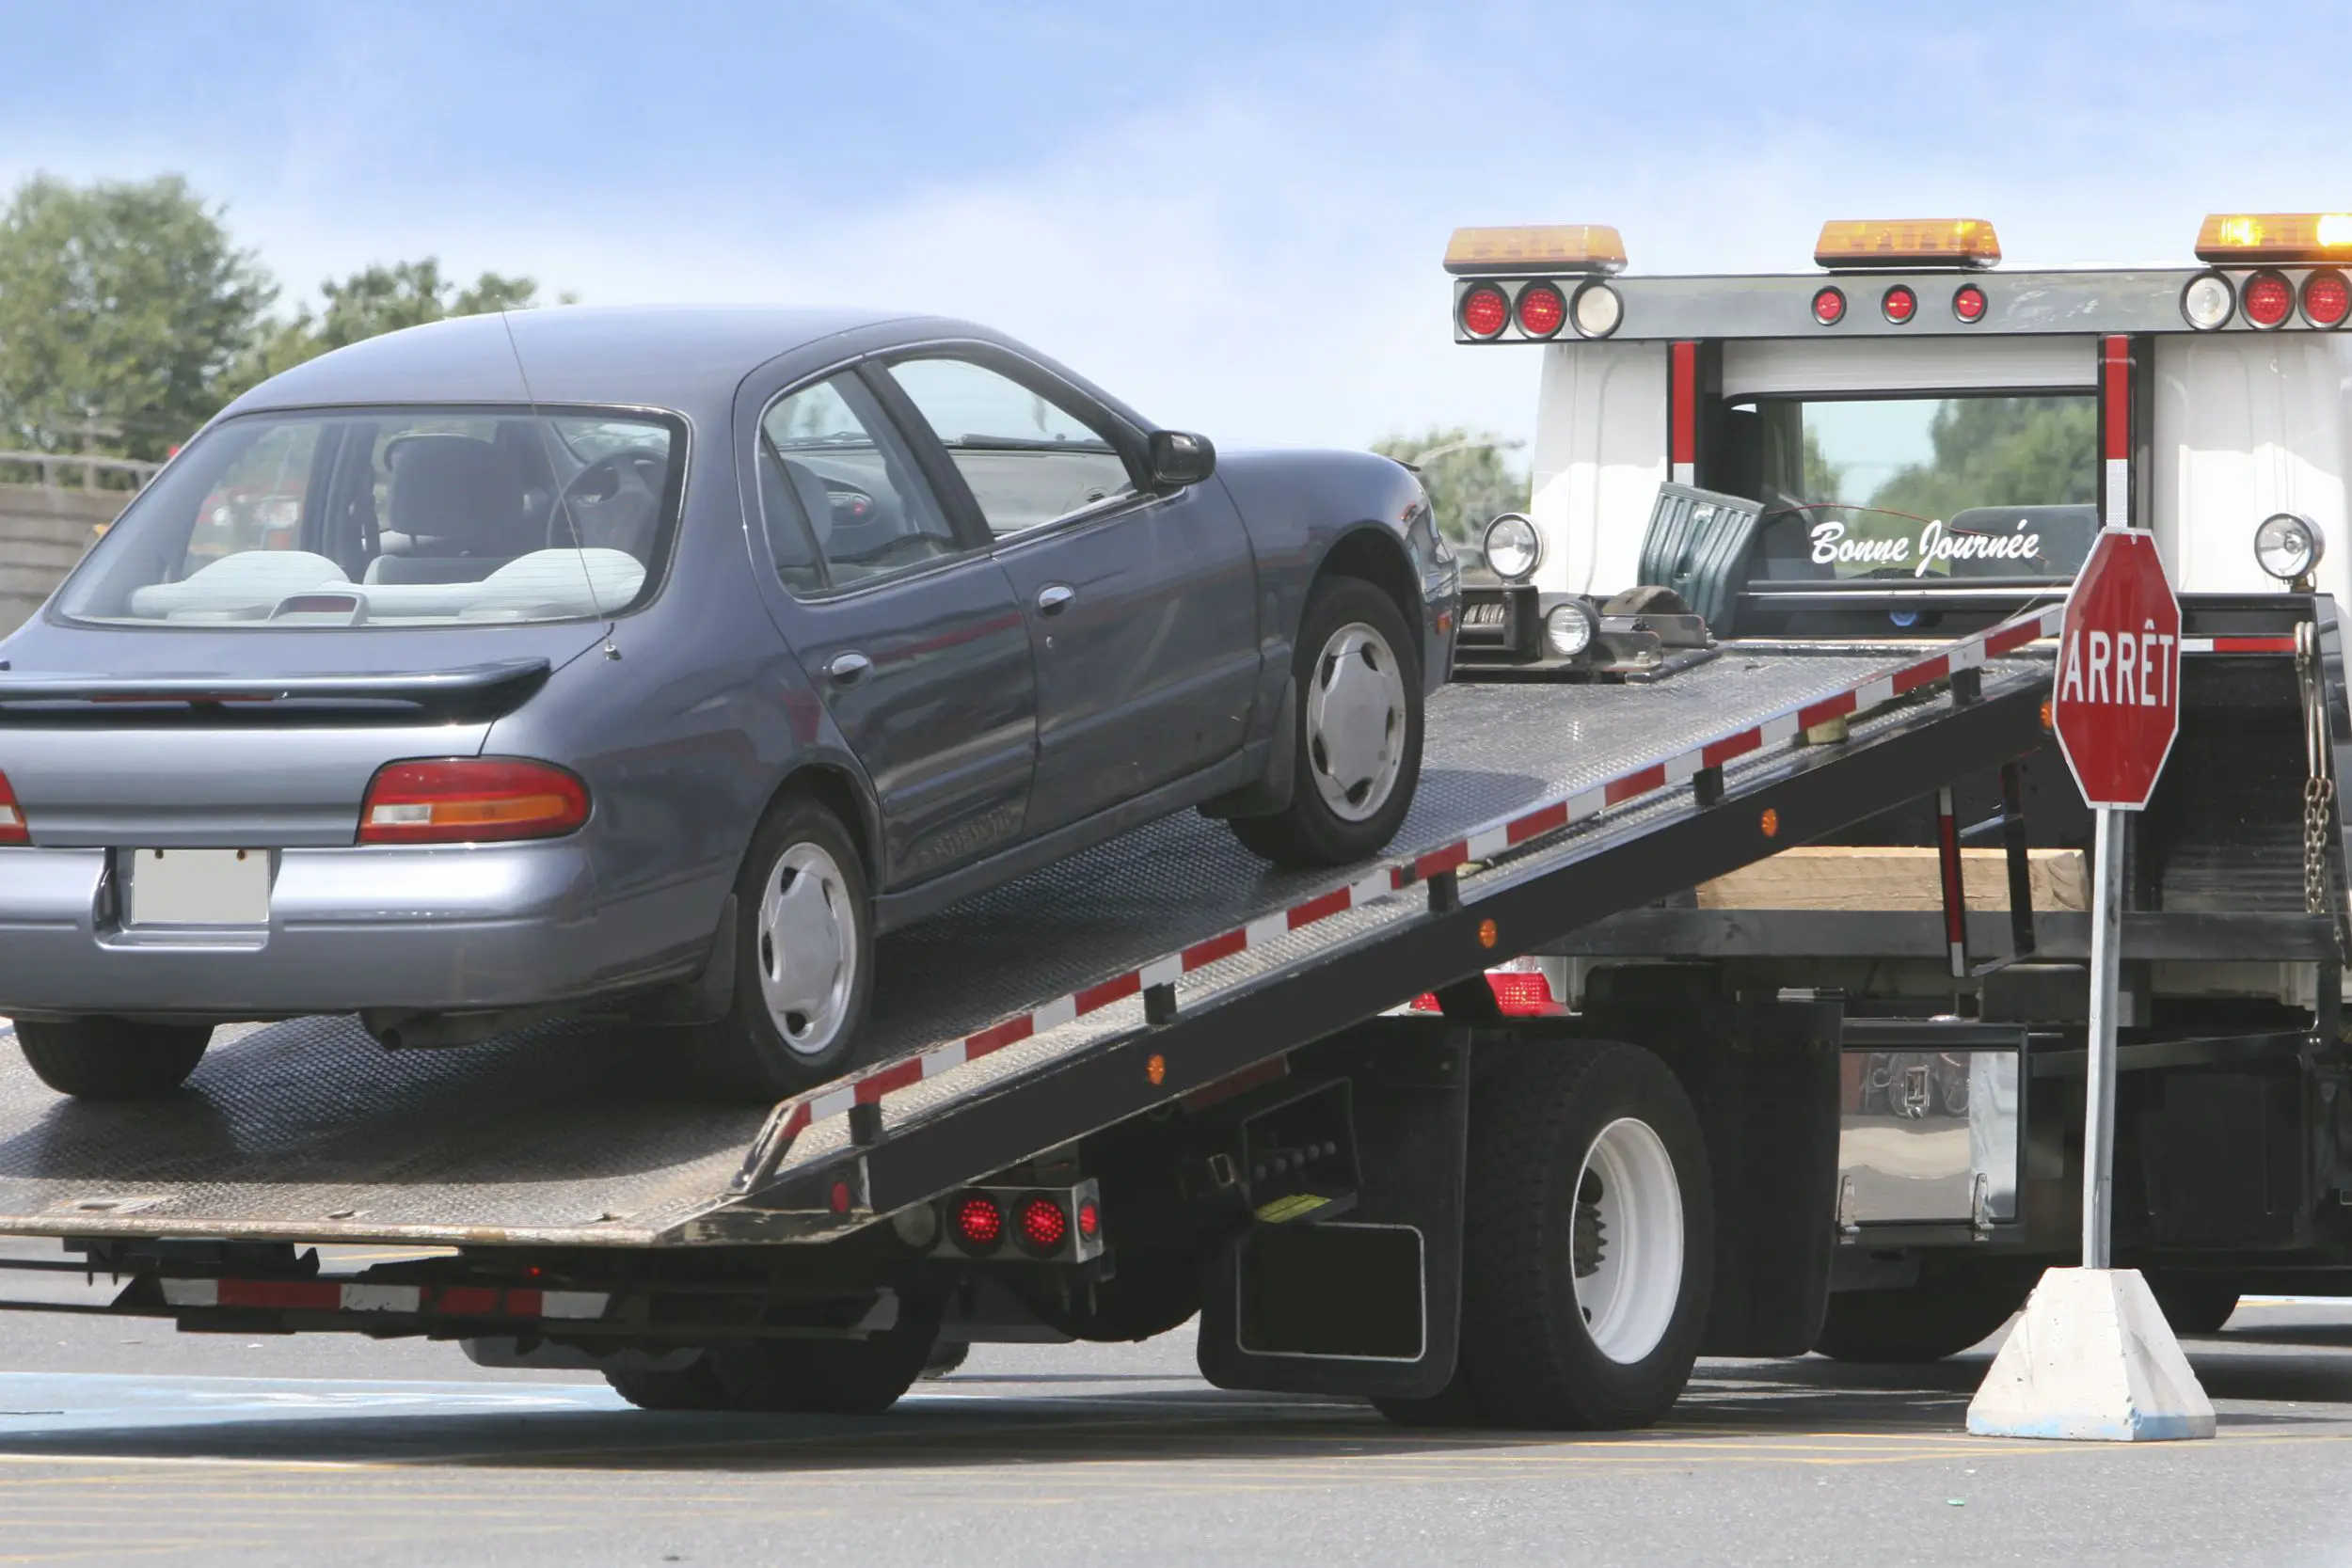 How Do I Get My Car Out of Impound?